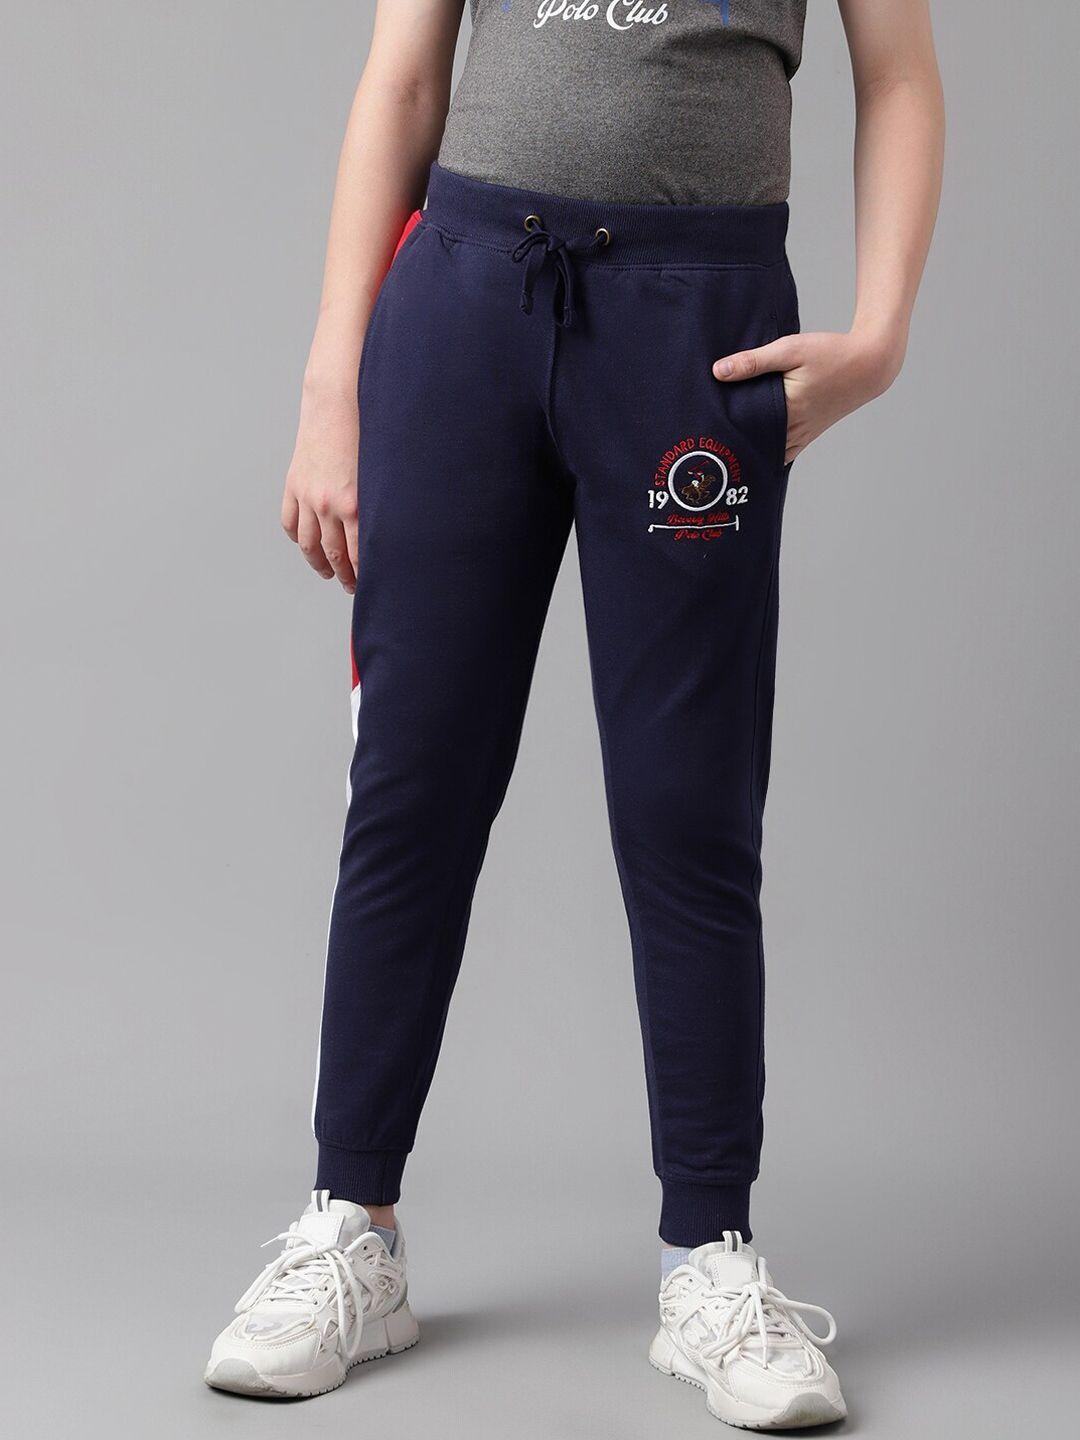 beverly-hills-polo-club-boys-printed-pure-cotton-joggers